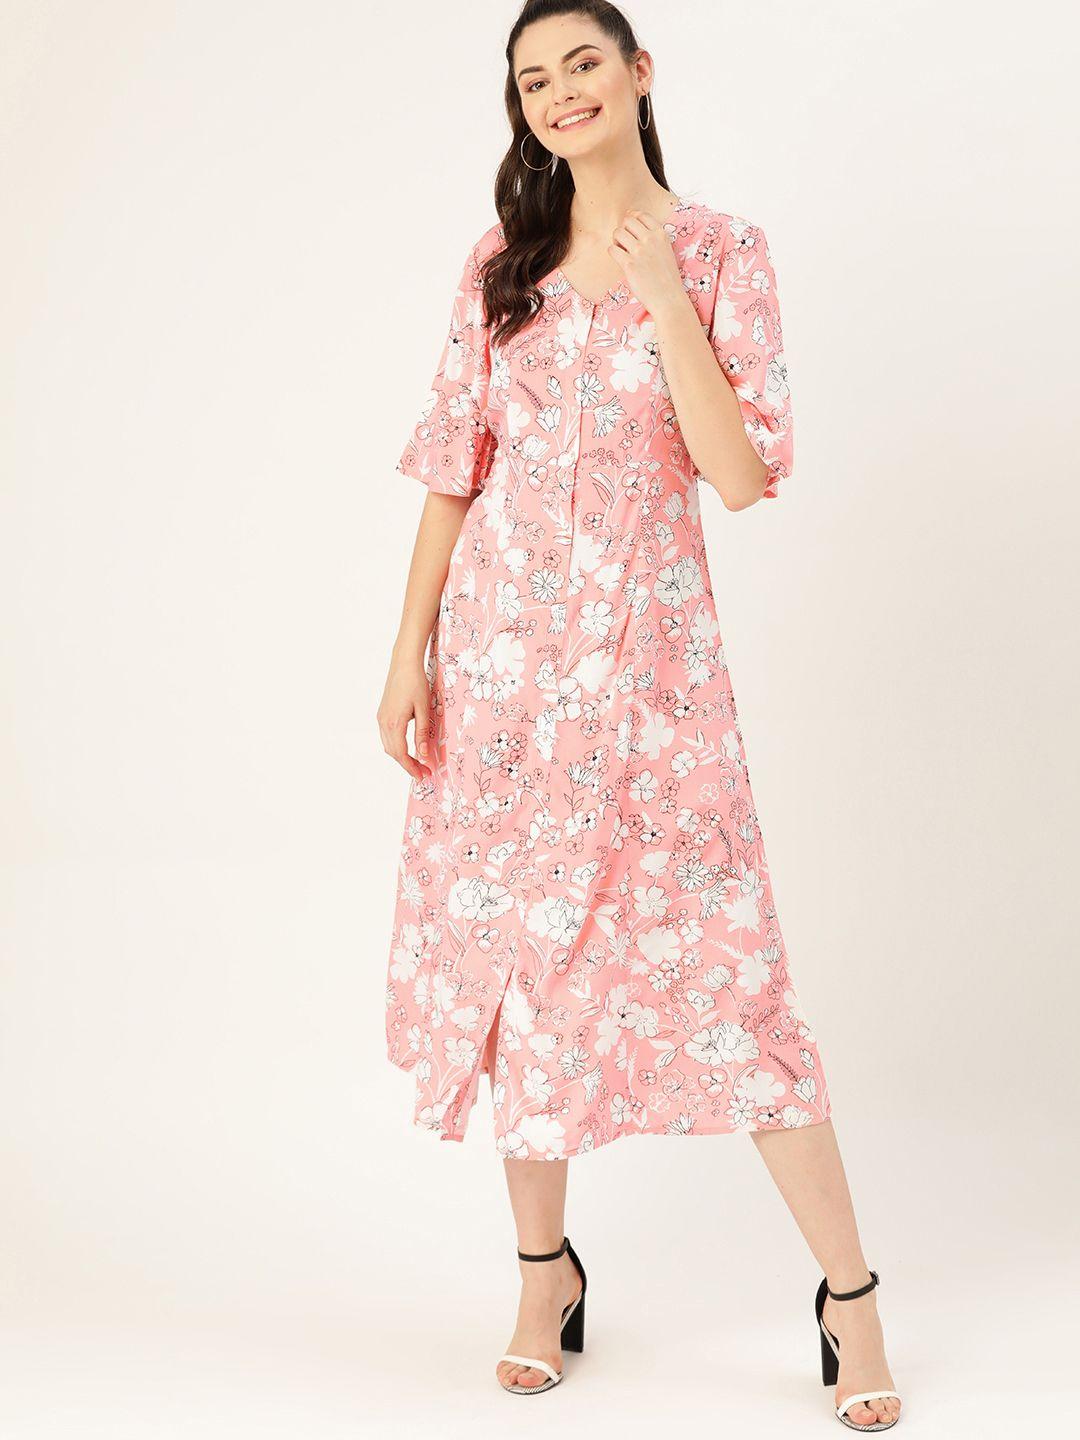 dressberry dusty pink & white floral printed a-line sustainable dress